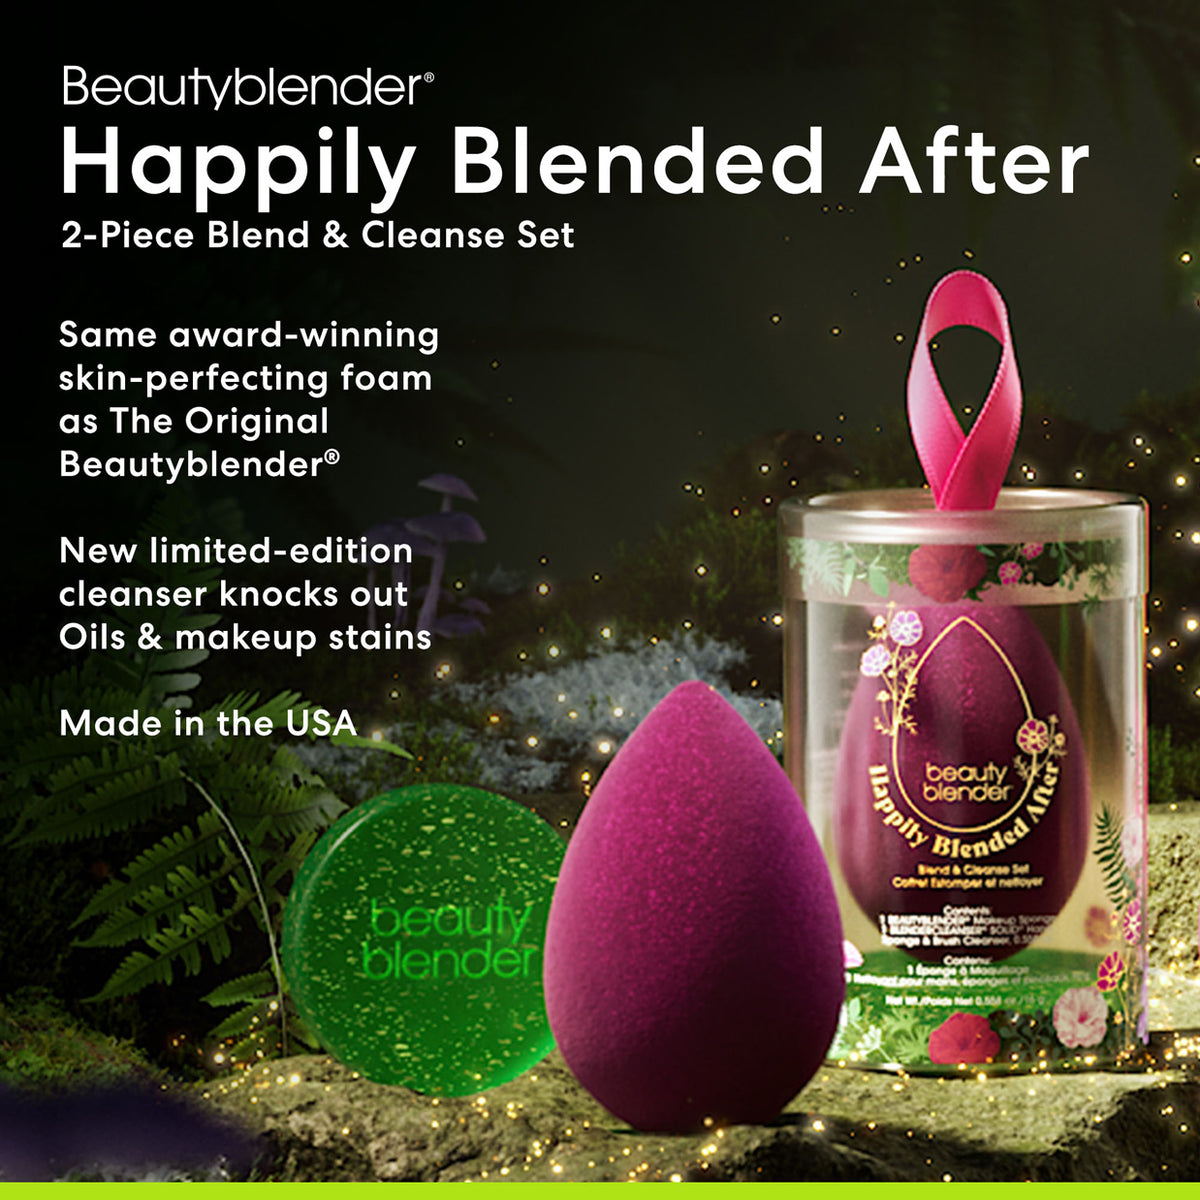 Happily Blended After 2-Piece Blend & Cleanse Set.